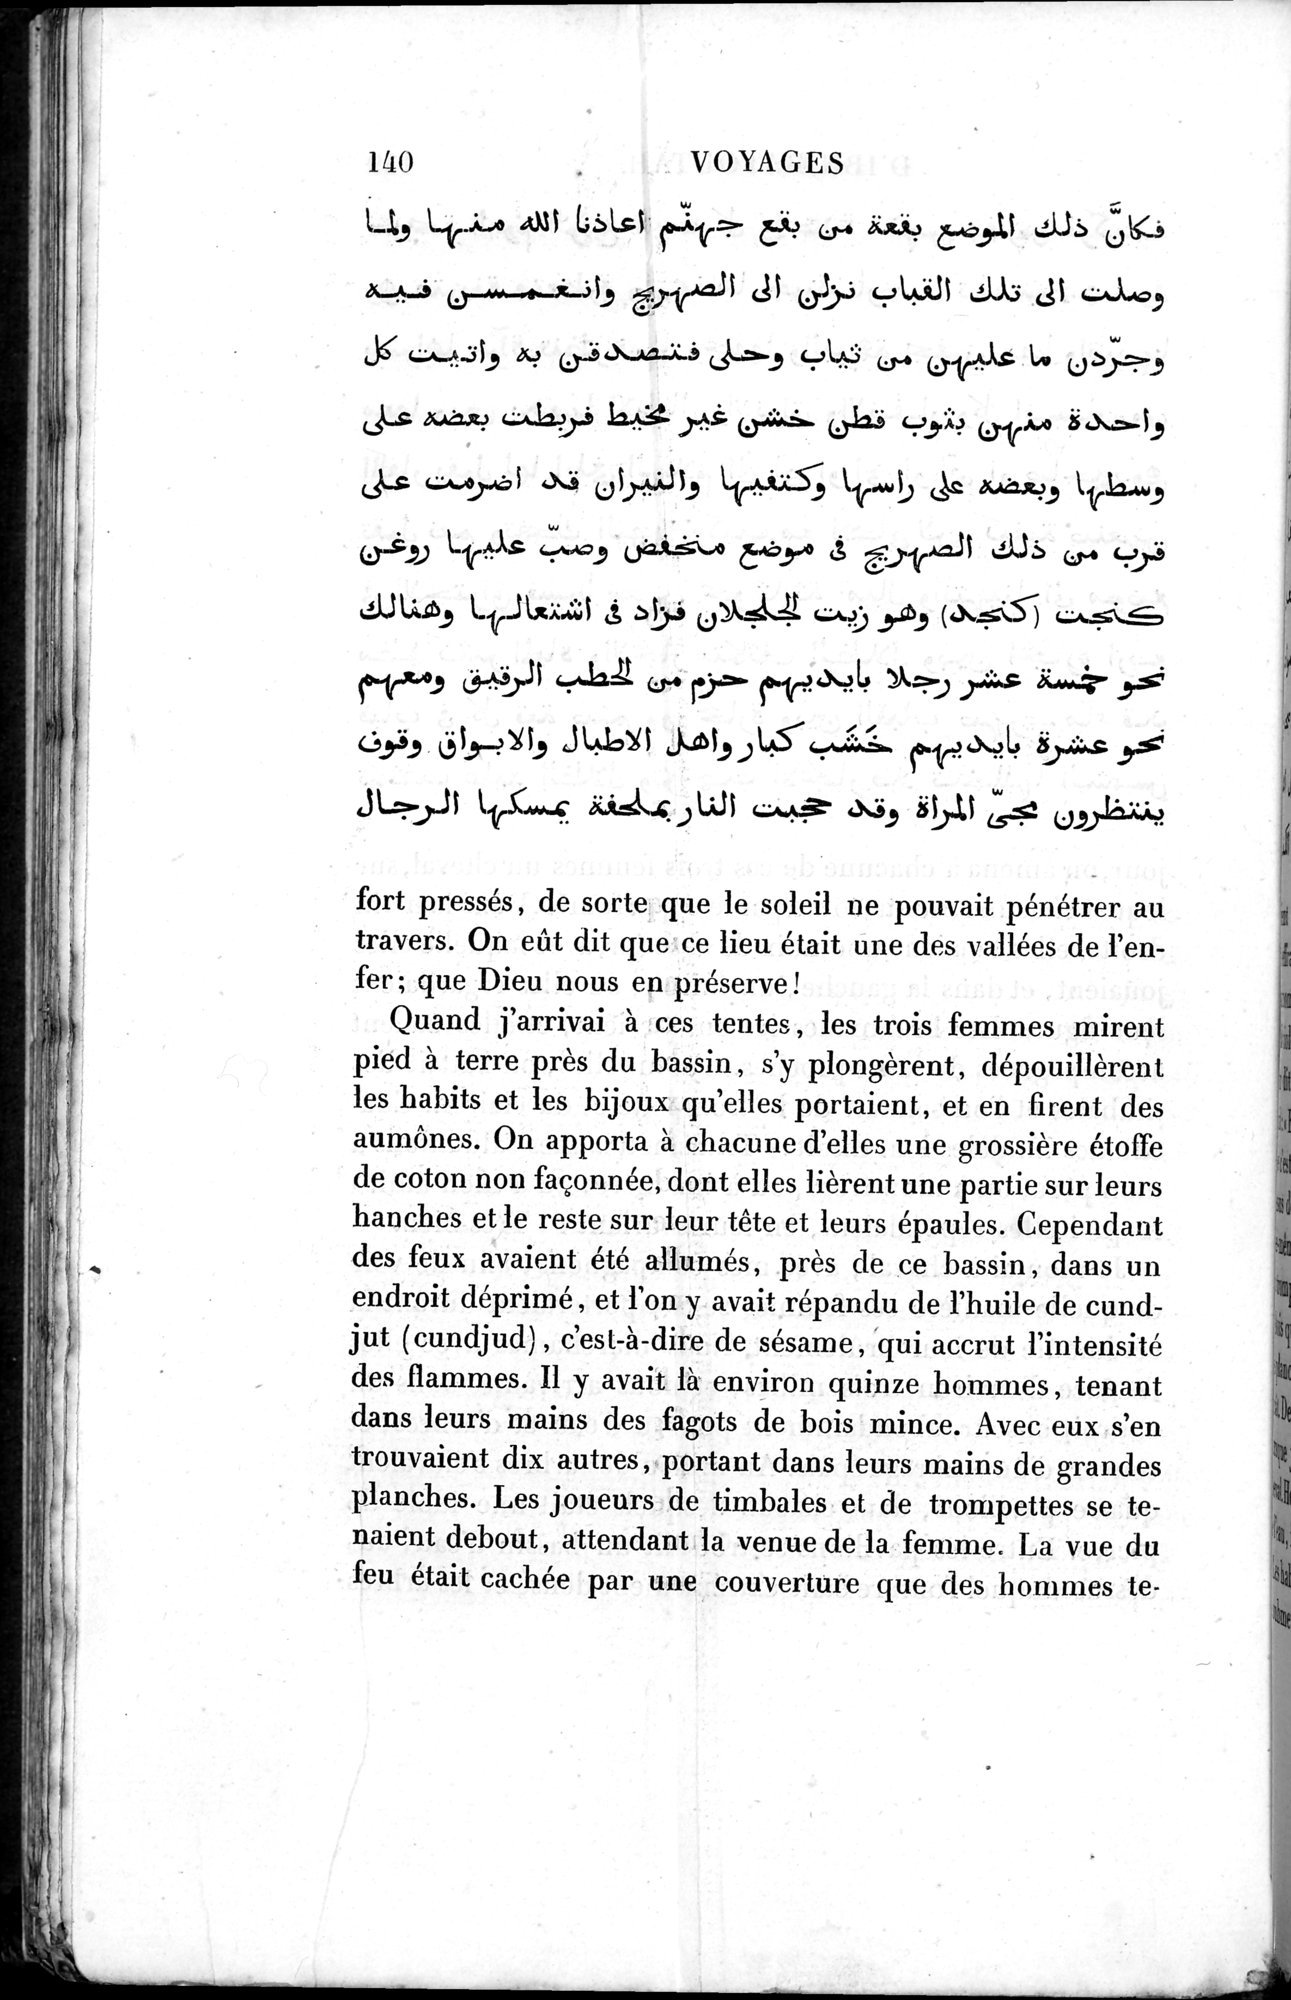 Voyages d'Ibn Batoutah : vol.3 / Page 180 (Grayscale High Resolution Image)